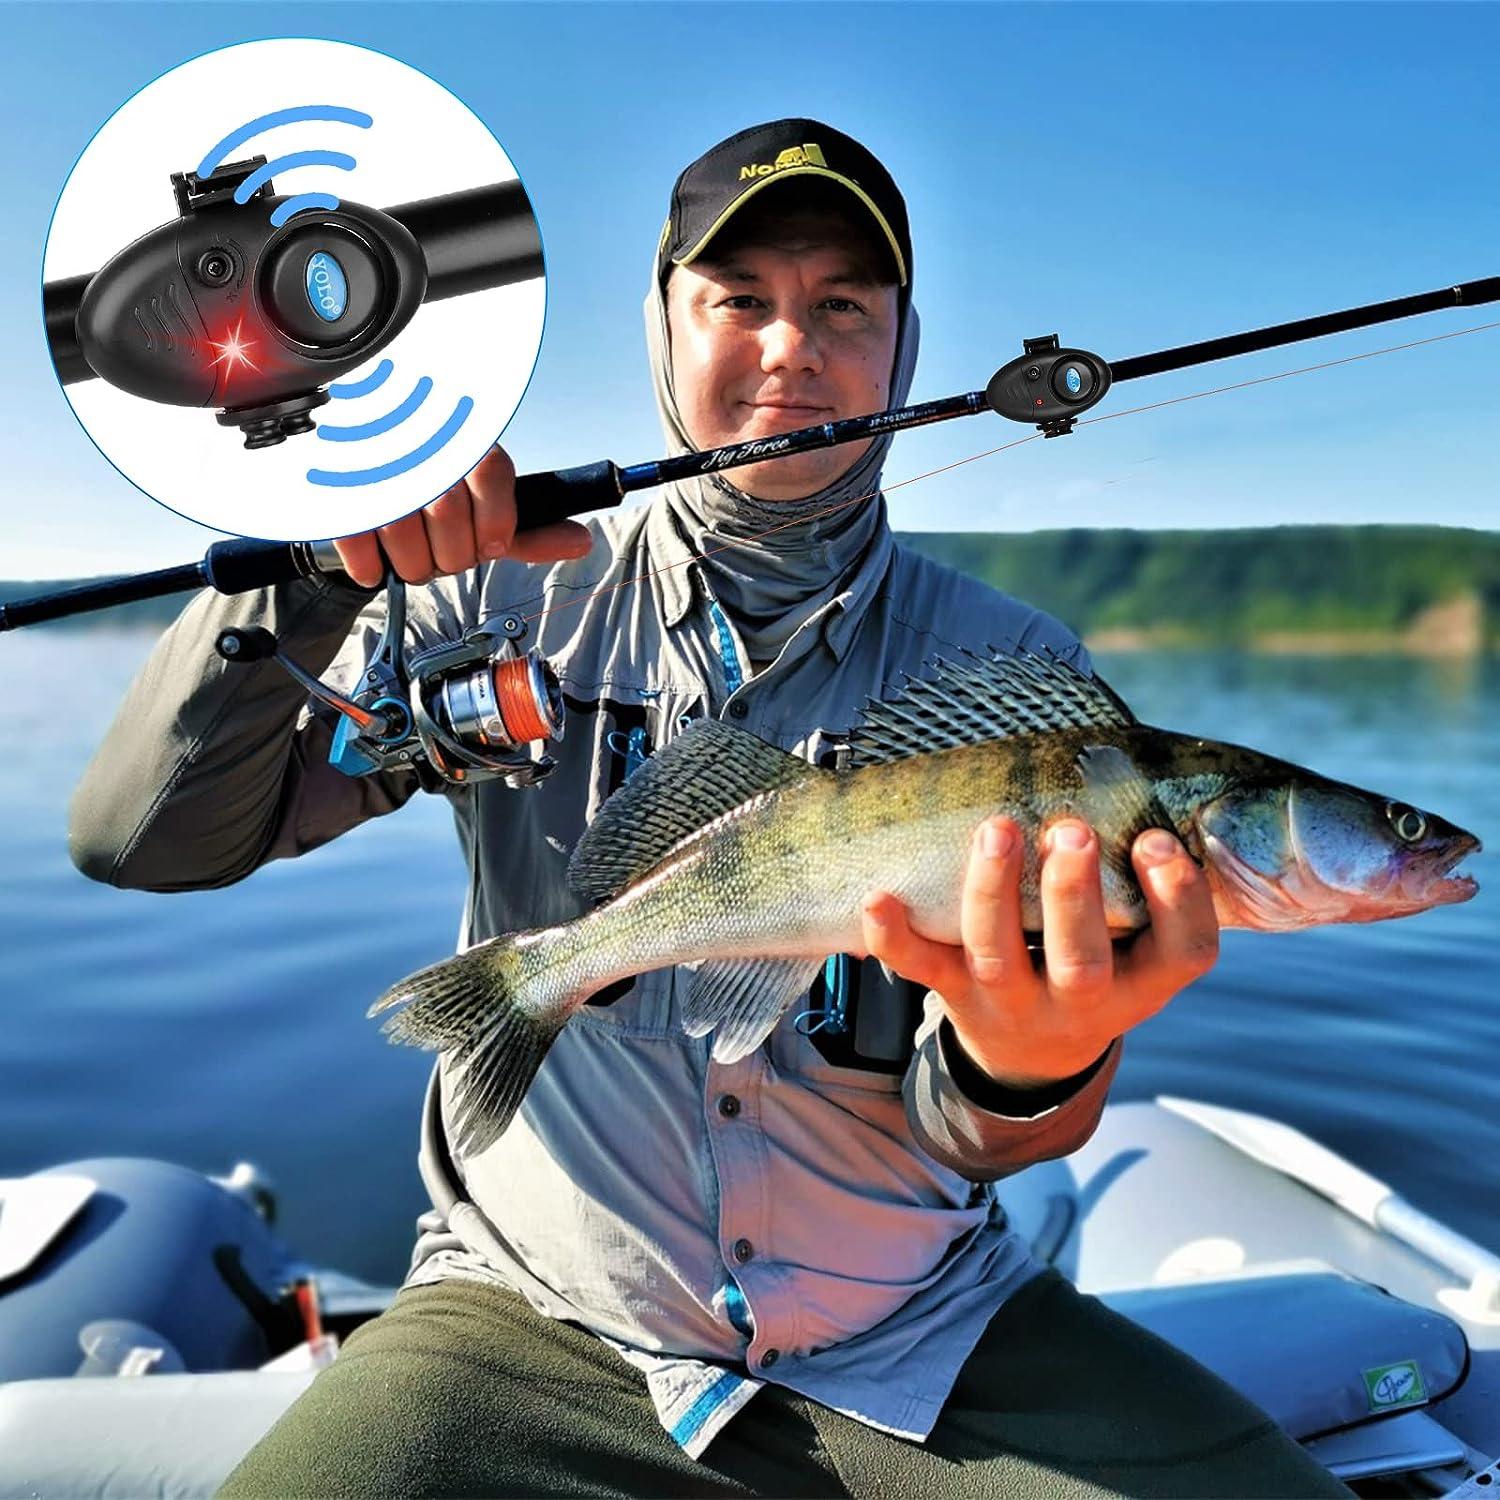  OHOH LED Night Fishing Rod Bite Bait Alarm Light with Twin  Bells Ring Fishing Bite Alarm Indicator On Fishing Rod (10 Red Lights and  10 Green Lights) : Sports & Outdoors